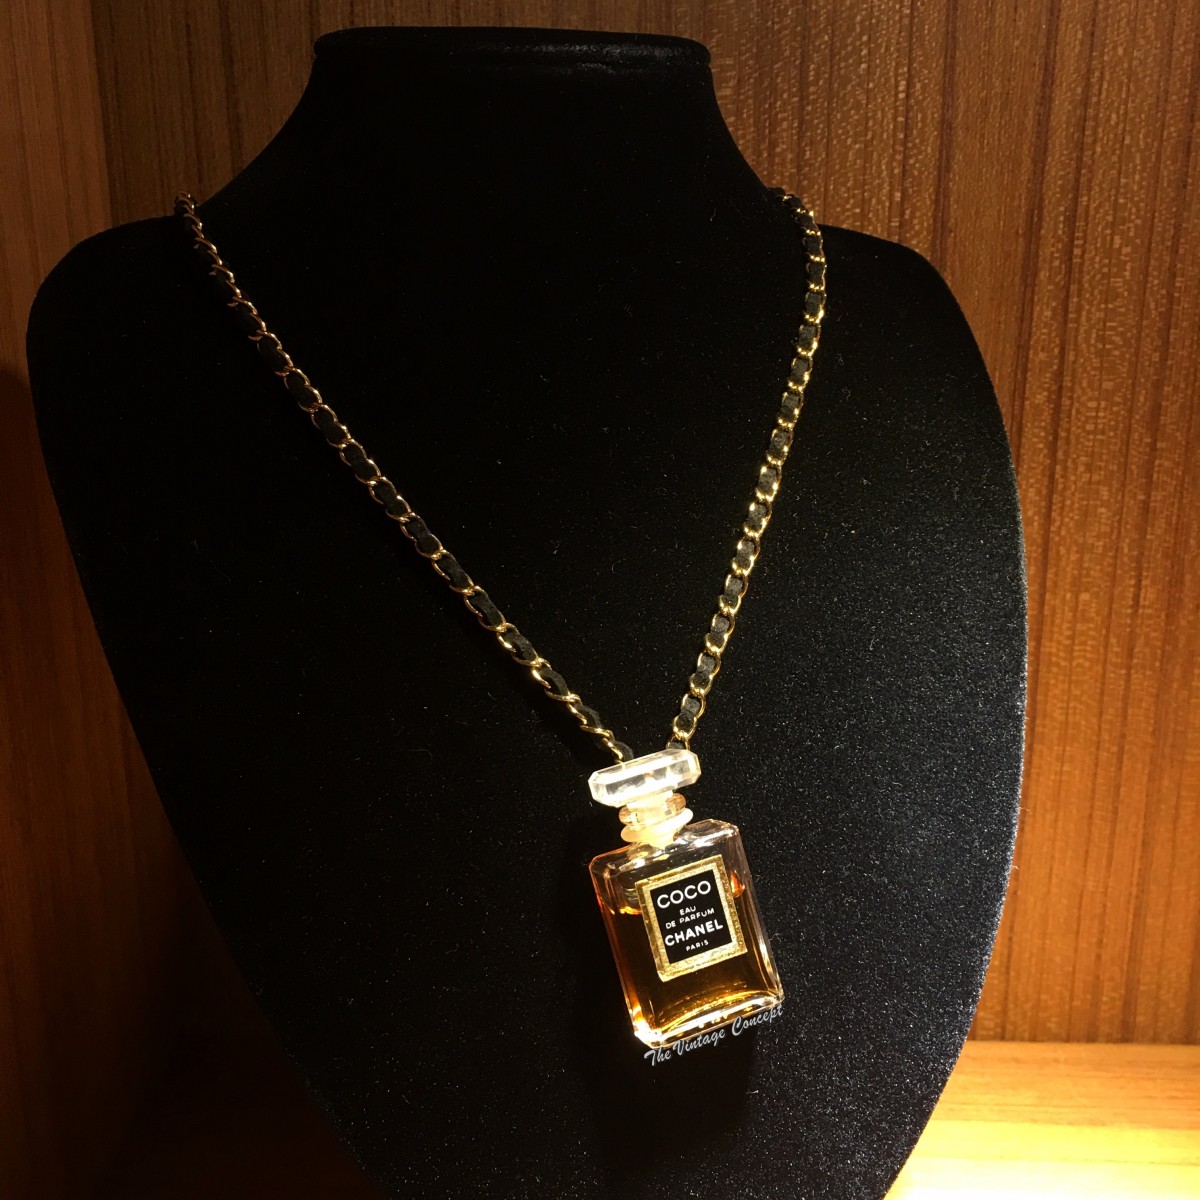 Chanel COCO Perfume Bottle Necklace (SOLD) - The Vintage Concept